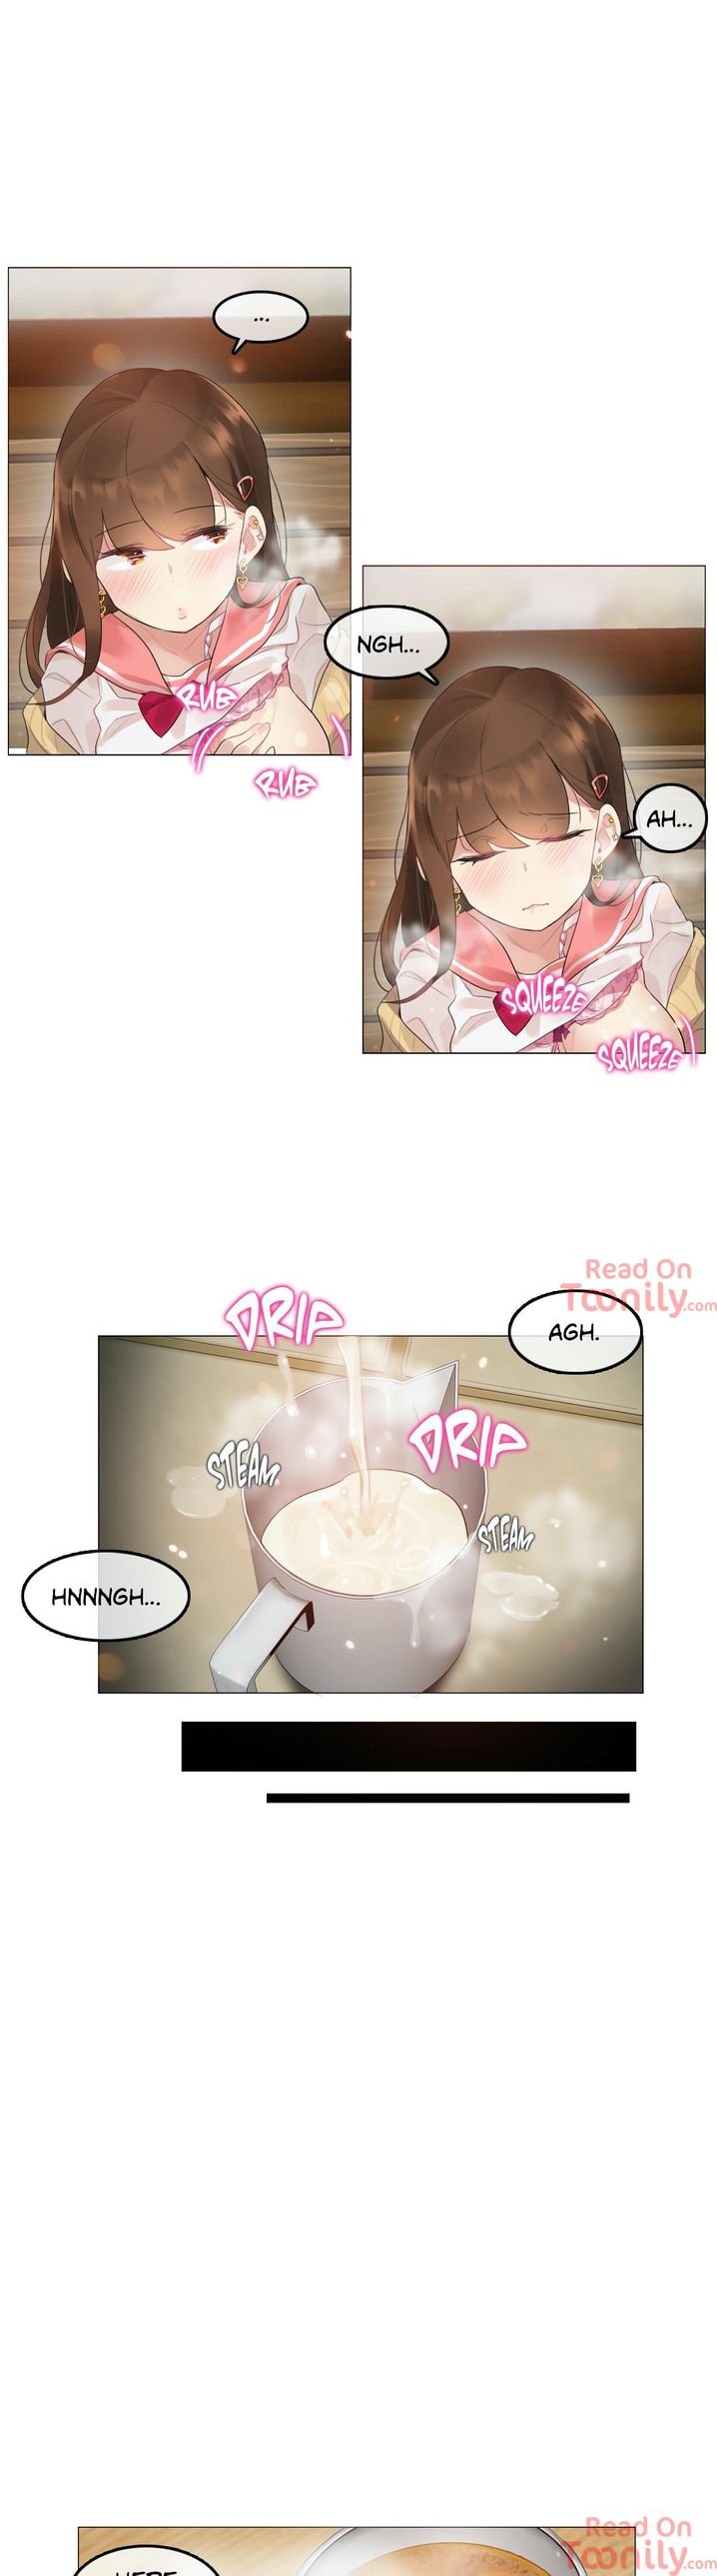 a-perverts-daily-life-chap-73-6